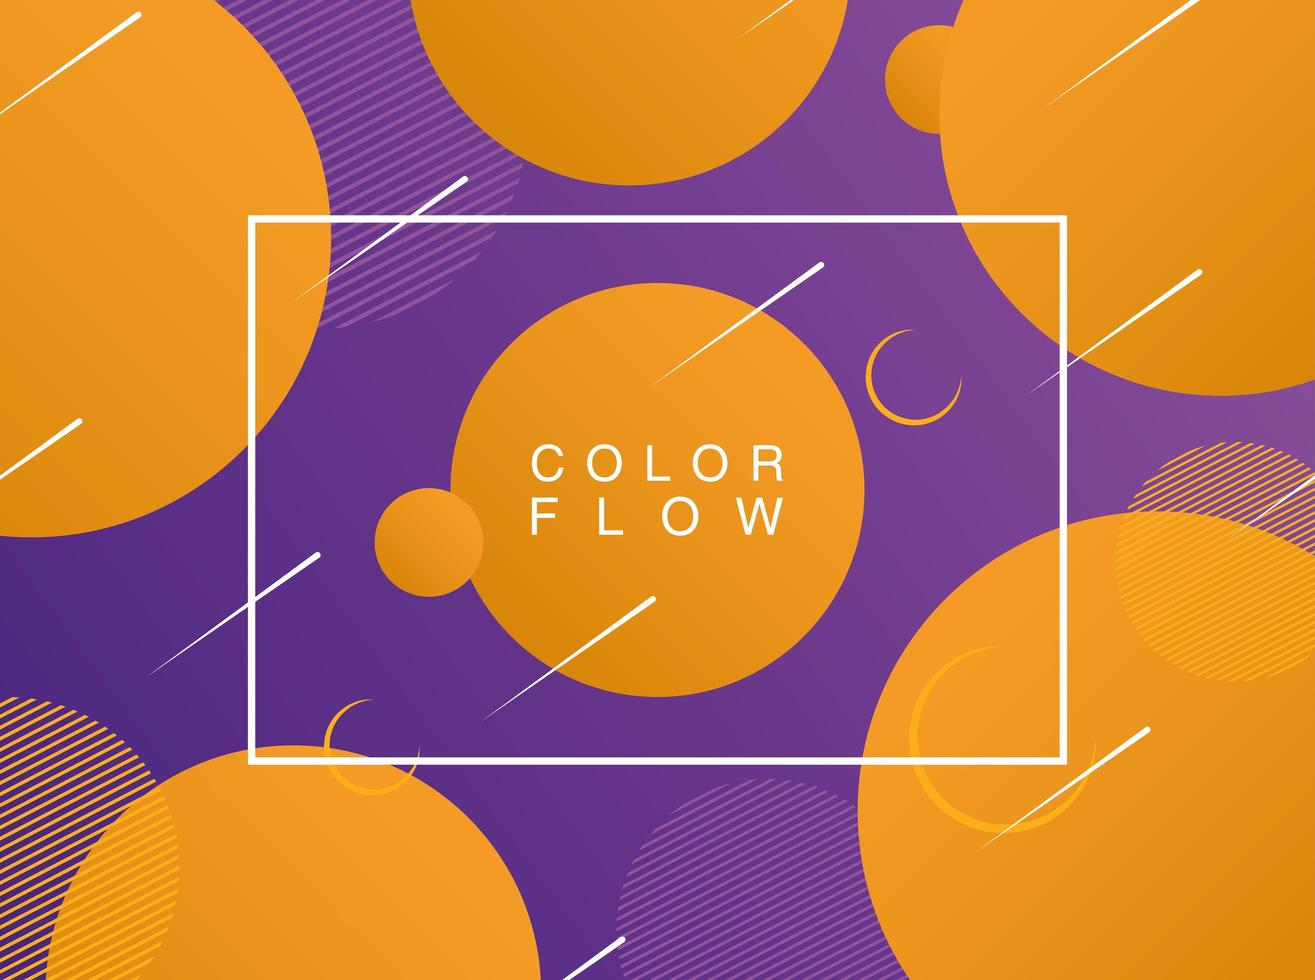 vivid color flow with rectangle frame background poster template vector